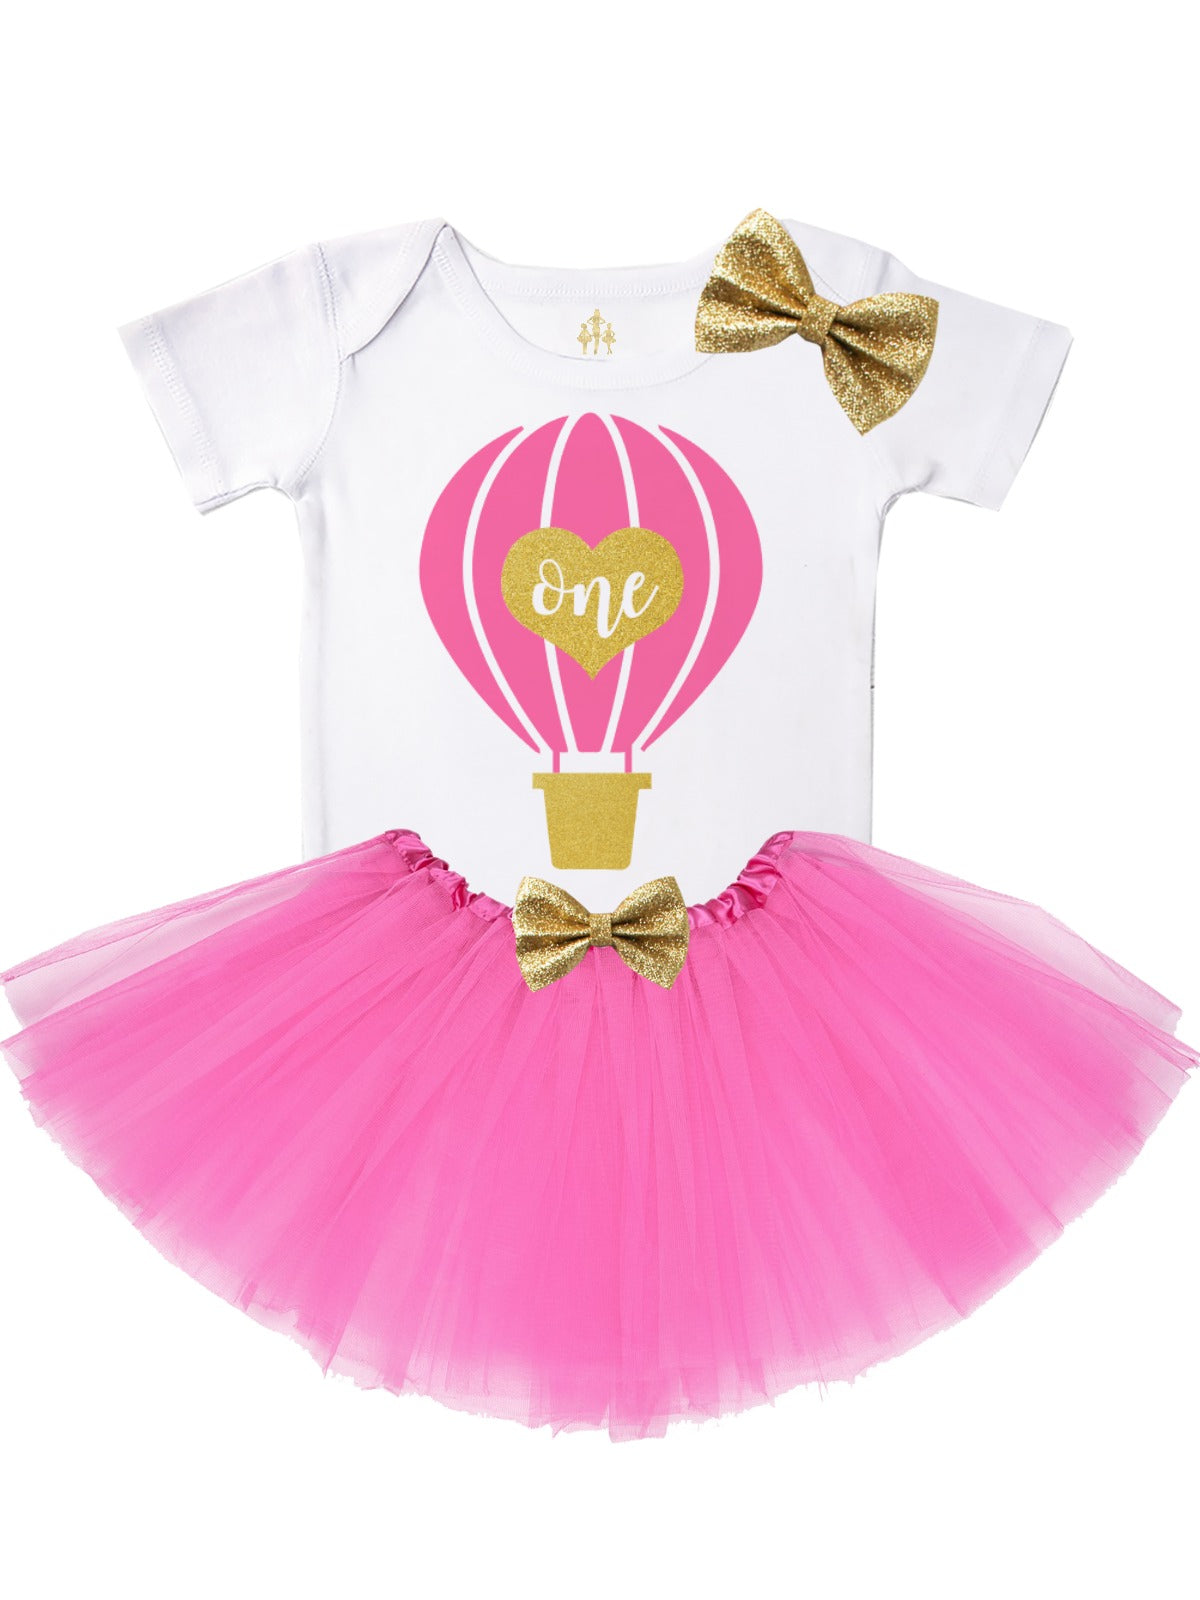 One Hot Air Balloon Tutu Outfit in Pink and Gold